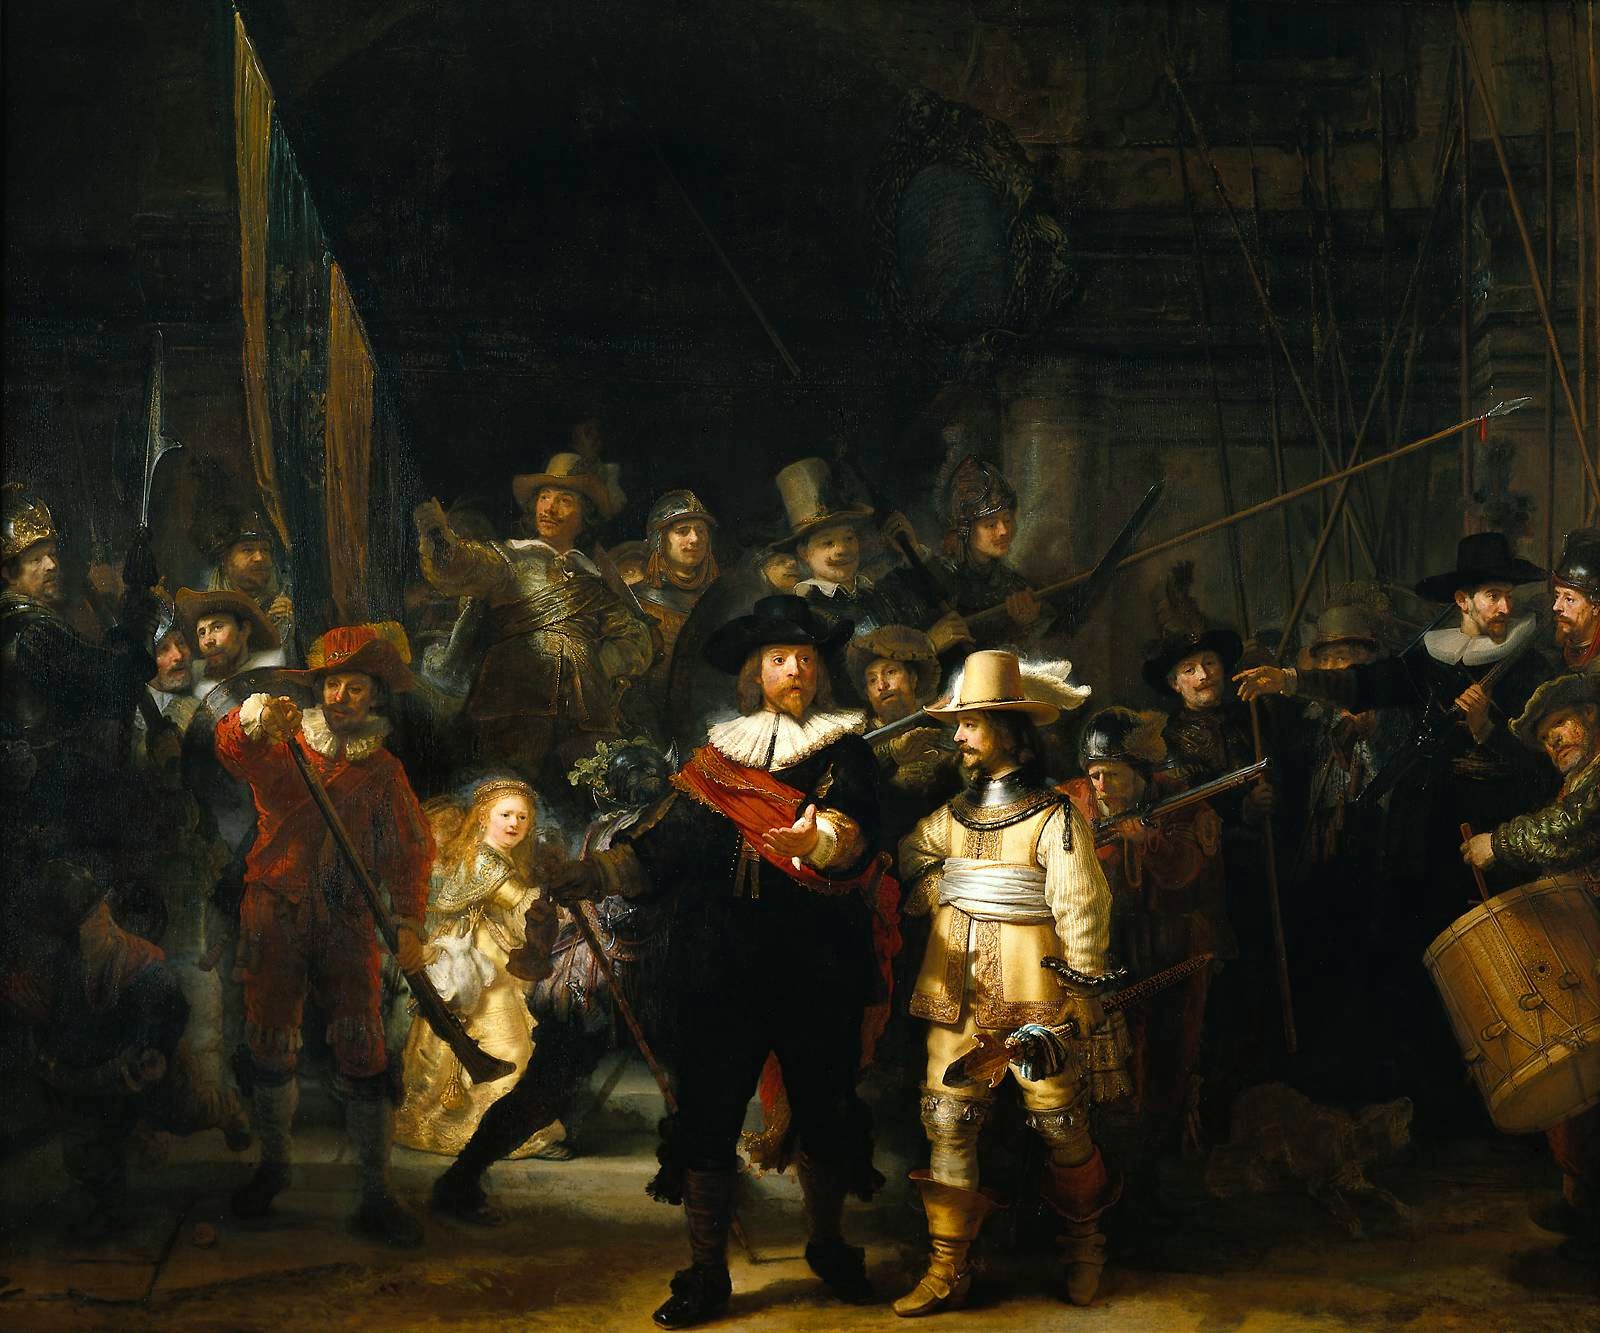 5 - The_Nightwatch_by_Rembrandt